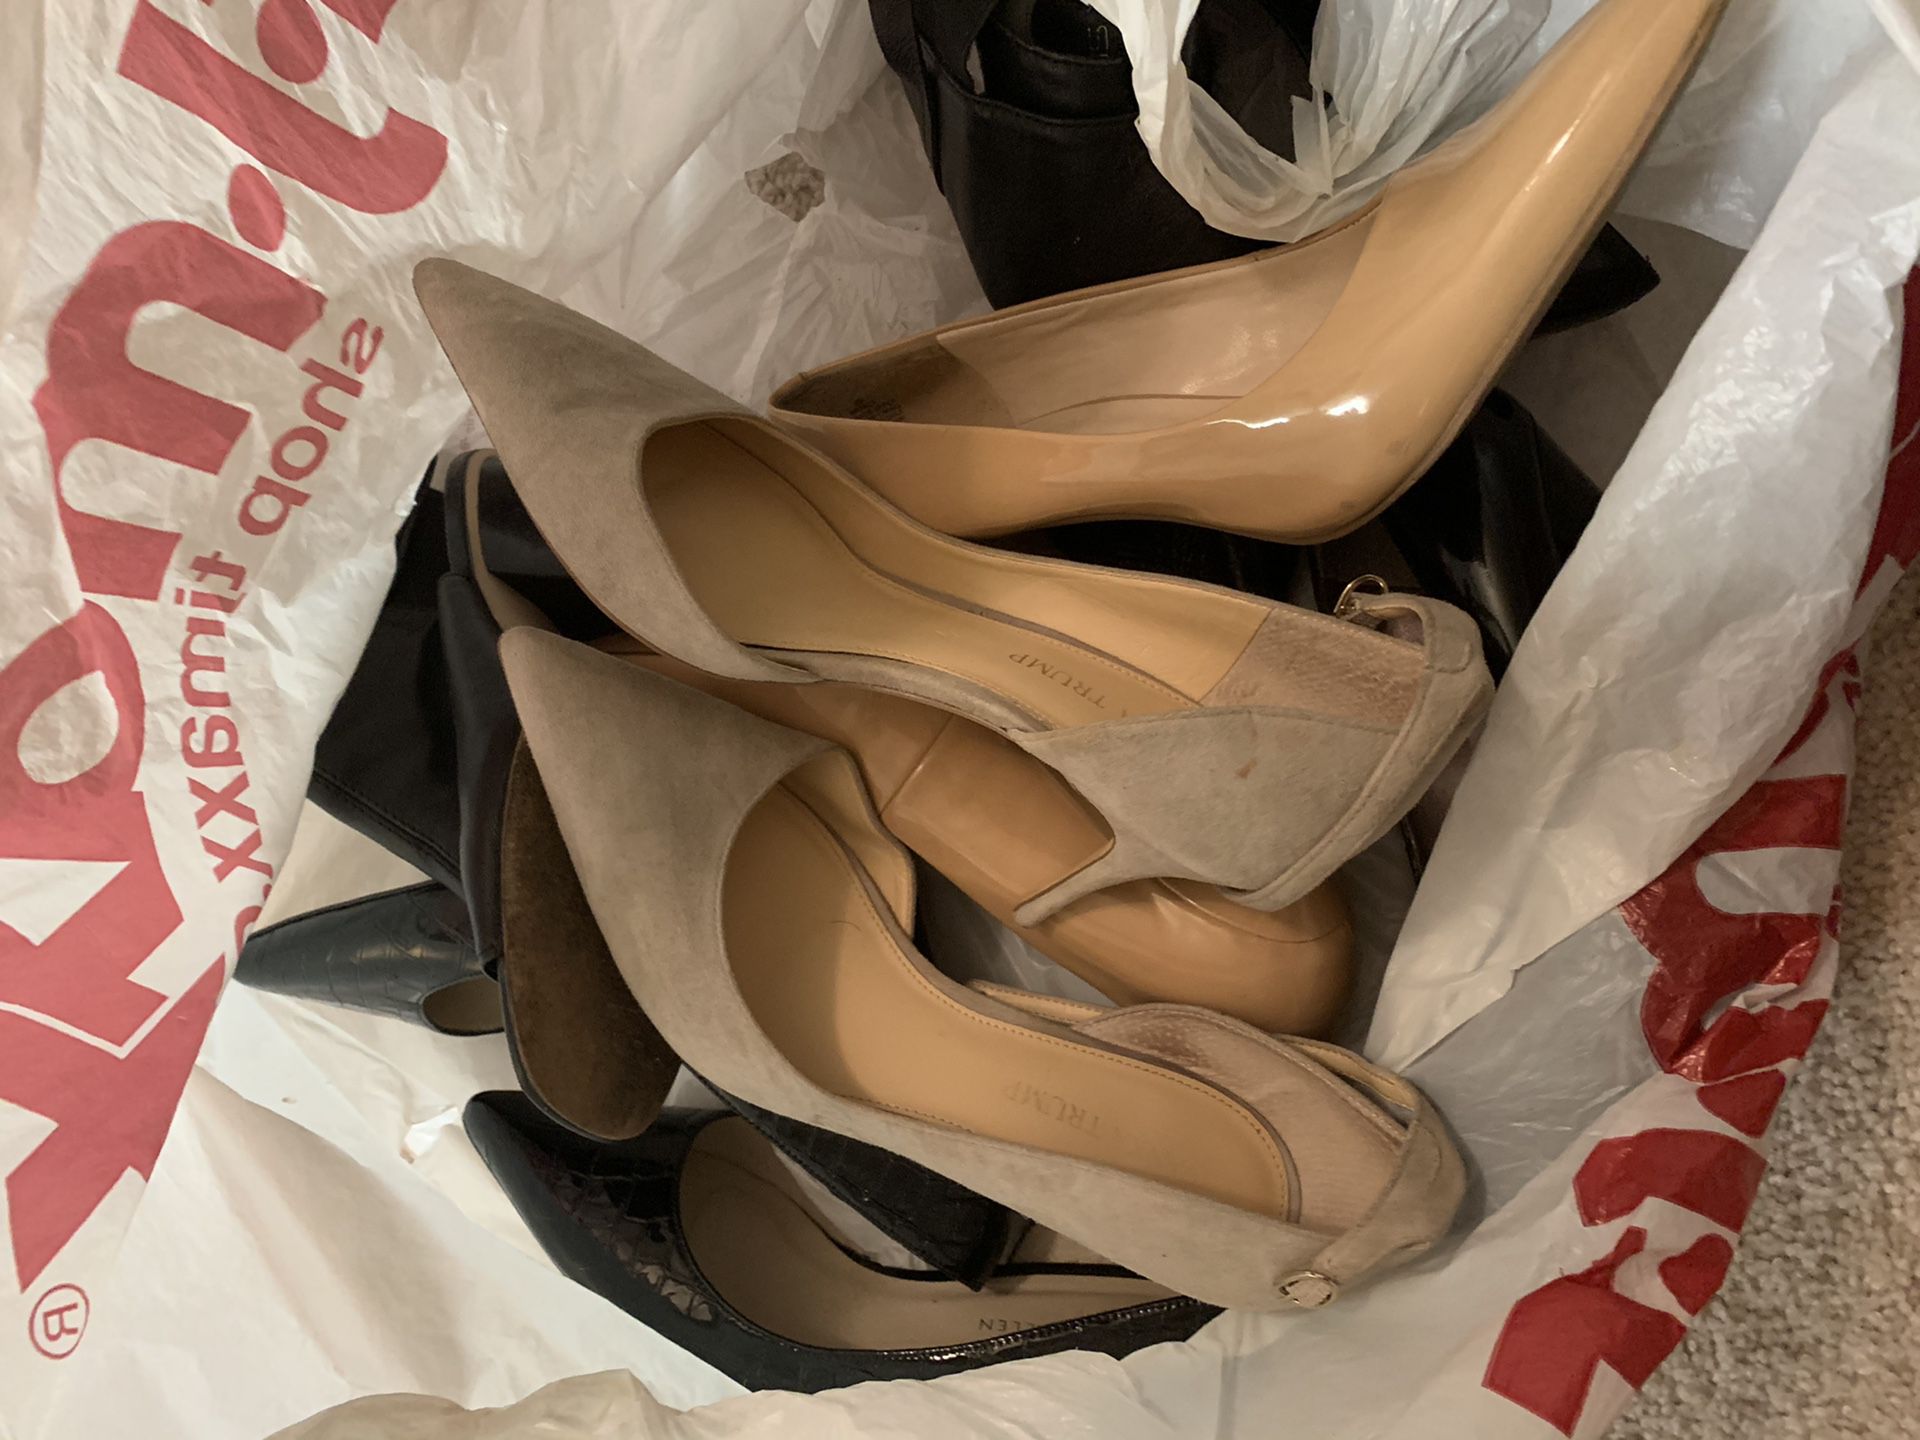 Free - bag of heels and 1 purse